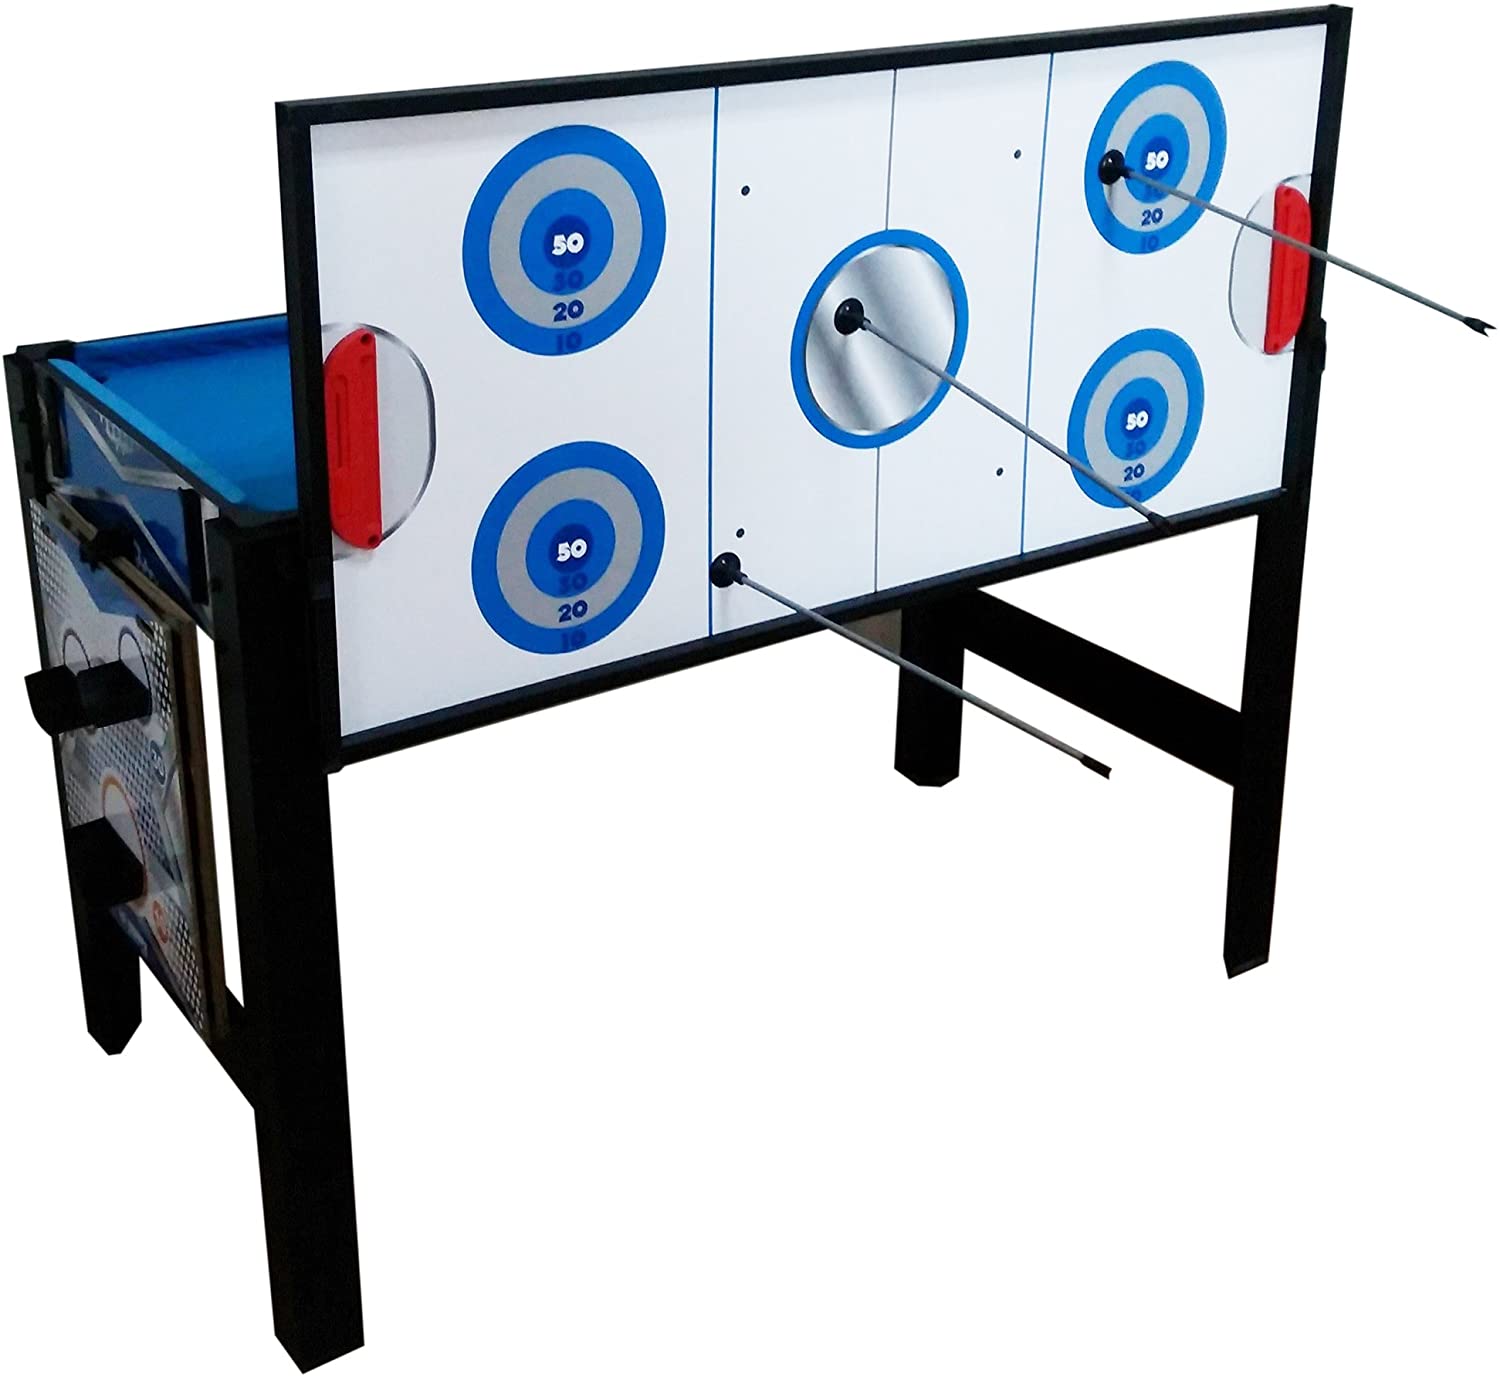 Triumph 13-in-1 Combo Game Table Includes Basketball Push Hockey and Skee Bean Bag Toss Launch Football Tic-Tac-Toe Billiards Baseball Table Tennis 